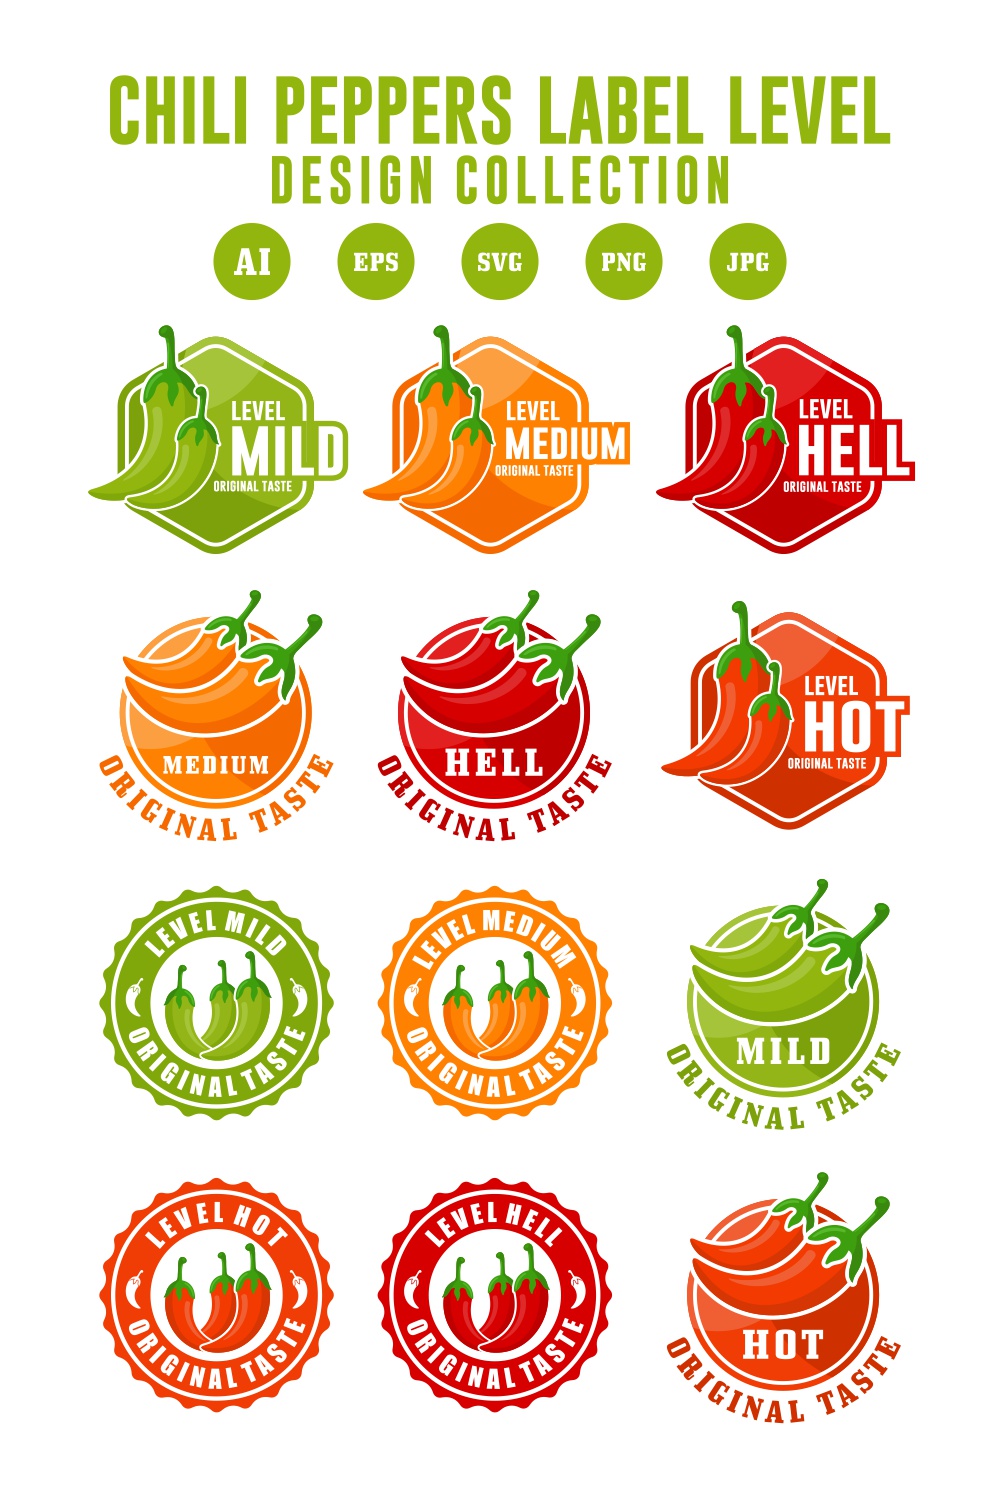 Set Chili peppers label logo design collection - $8 pinterest preview image.